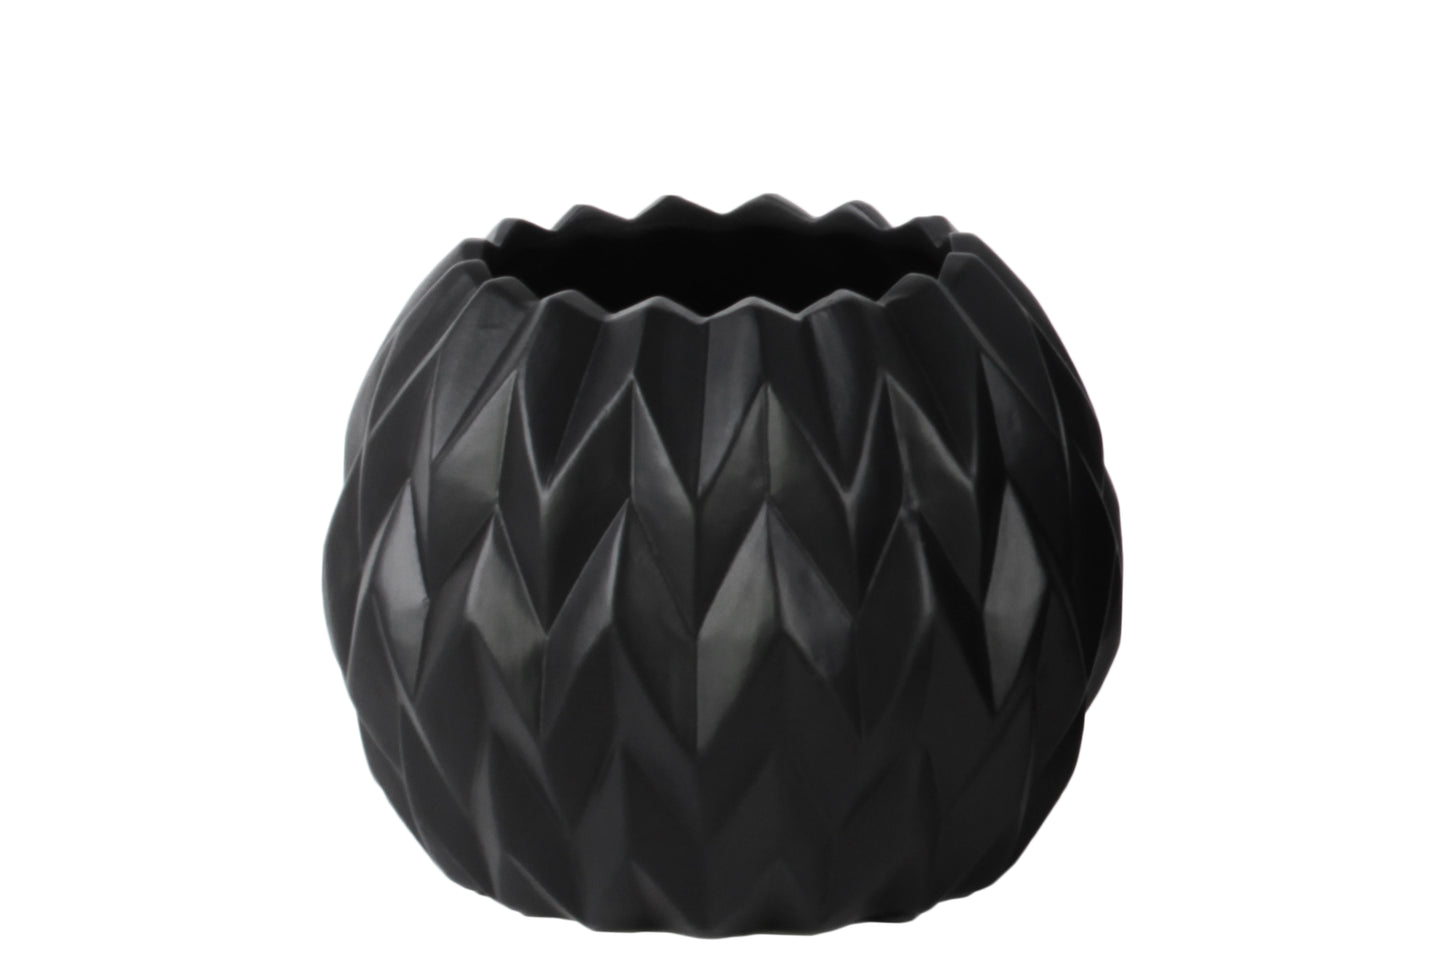 Ceramic Round Low Vase with Uneven Lip and Embossed Wave Design Matte Finish Black